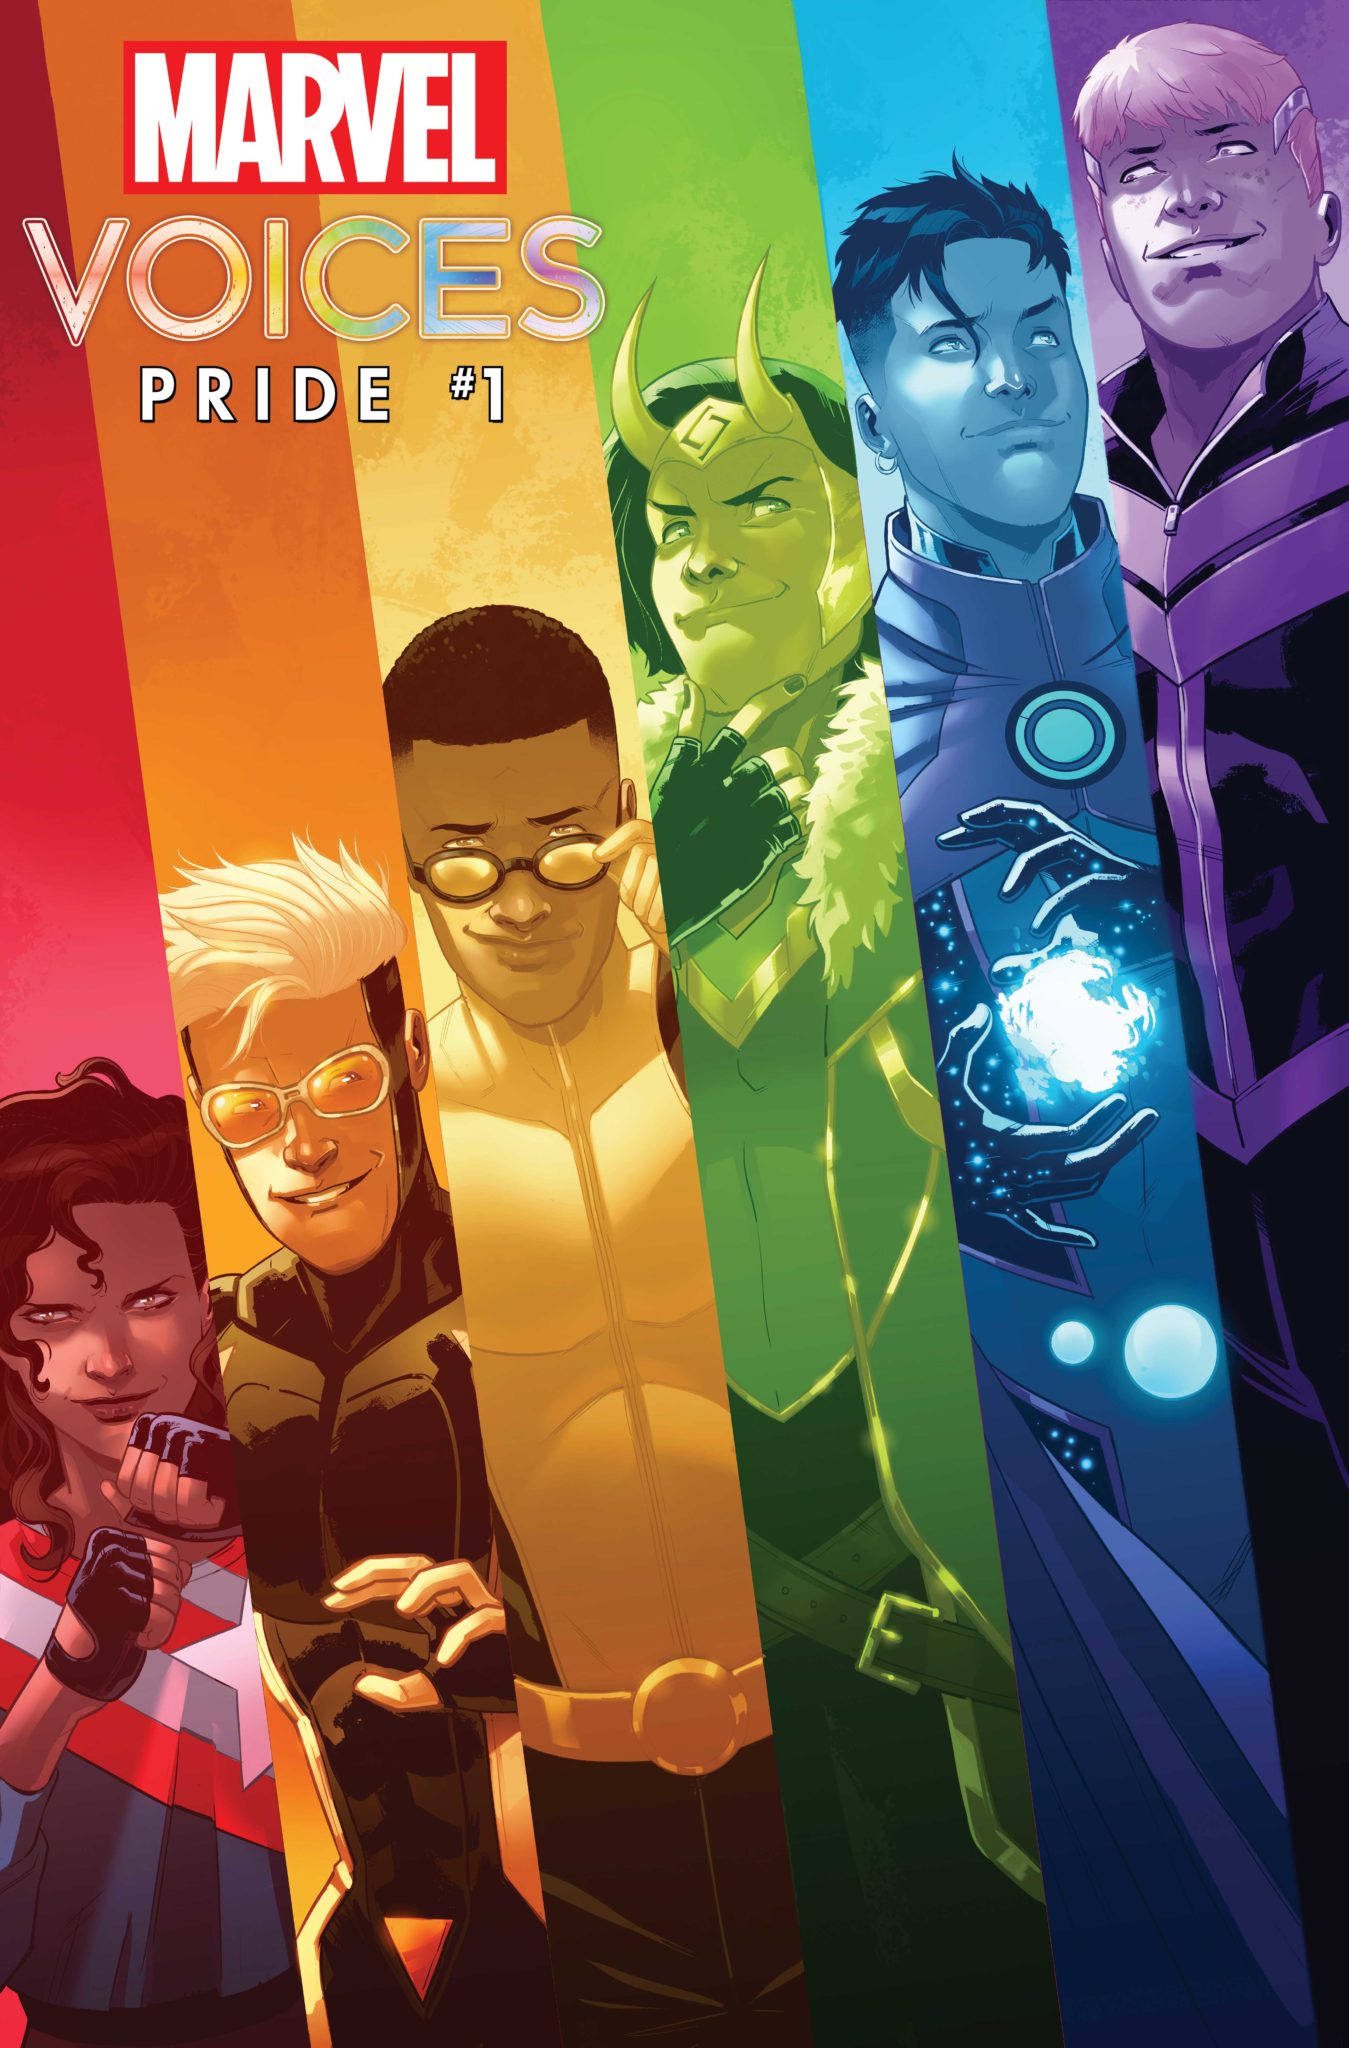 Marvel's Voices Pride cover,